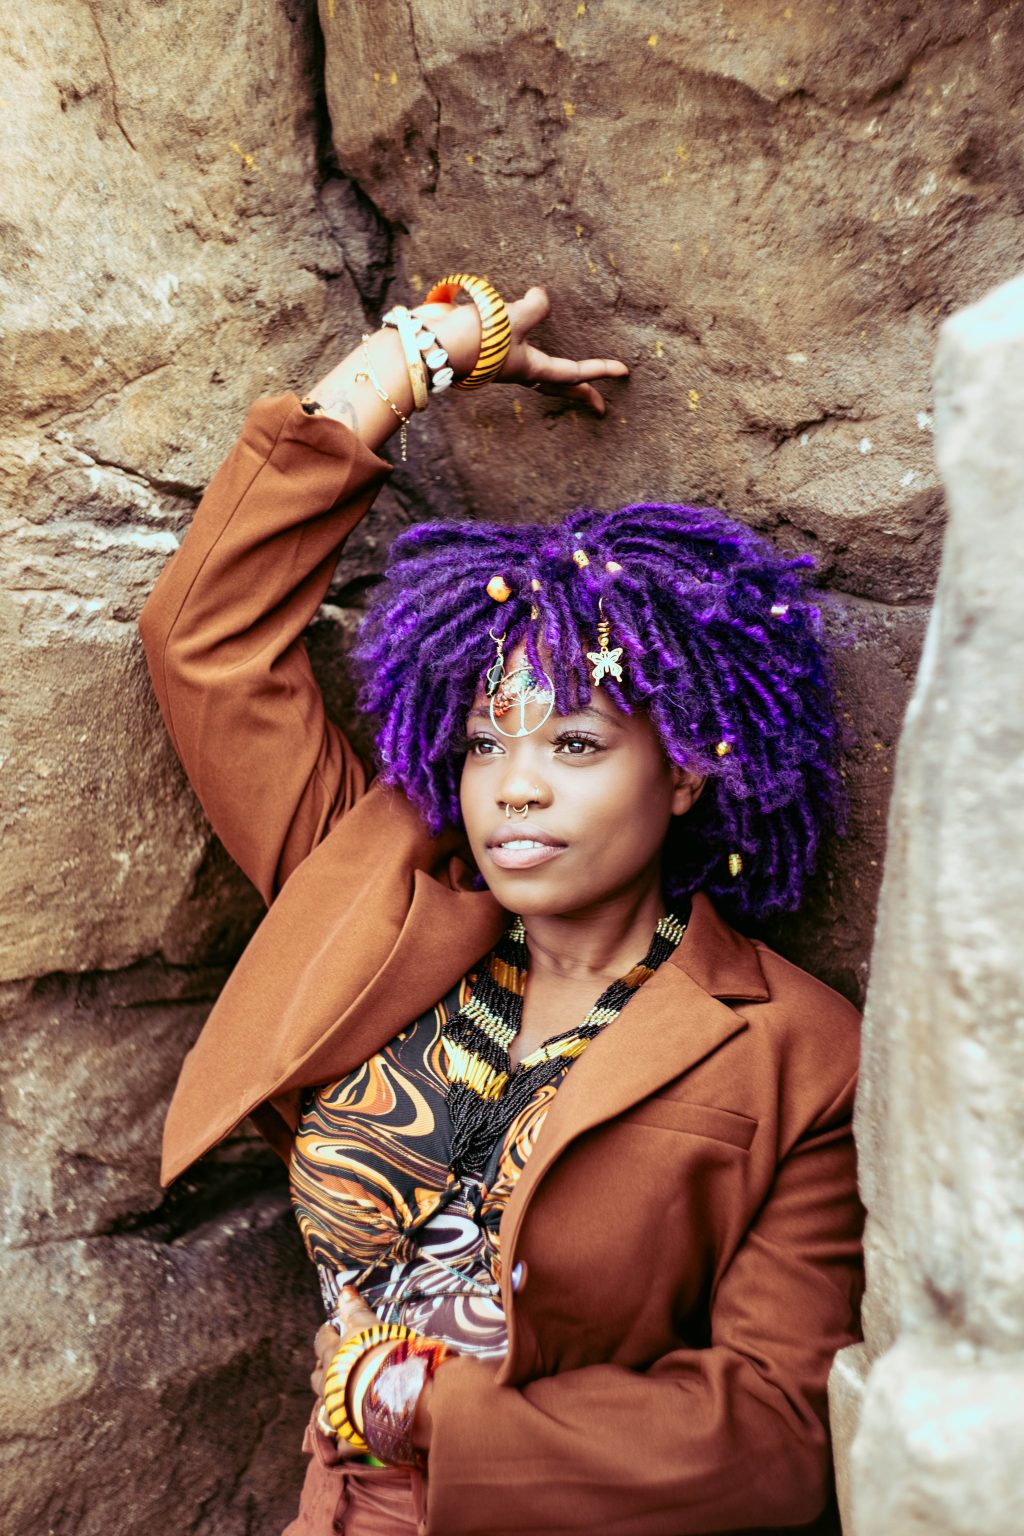 Eyve poses against a large wall of stone. She has a purple afro and is wearing a brown suit. She has one hand touching the tock above her head and another touching her torso.